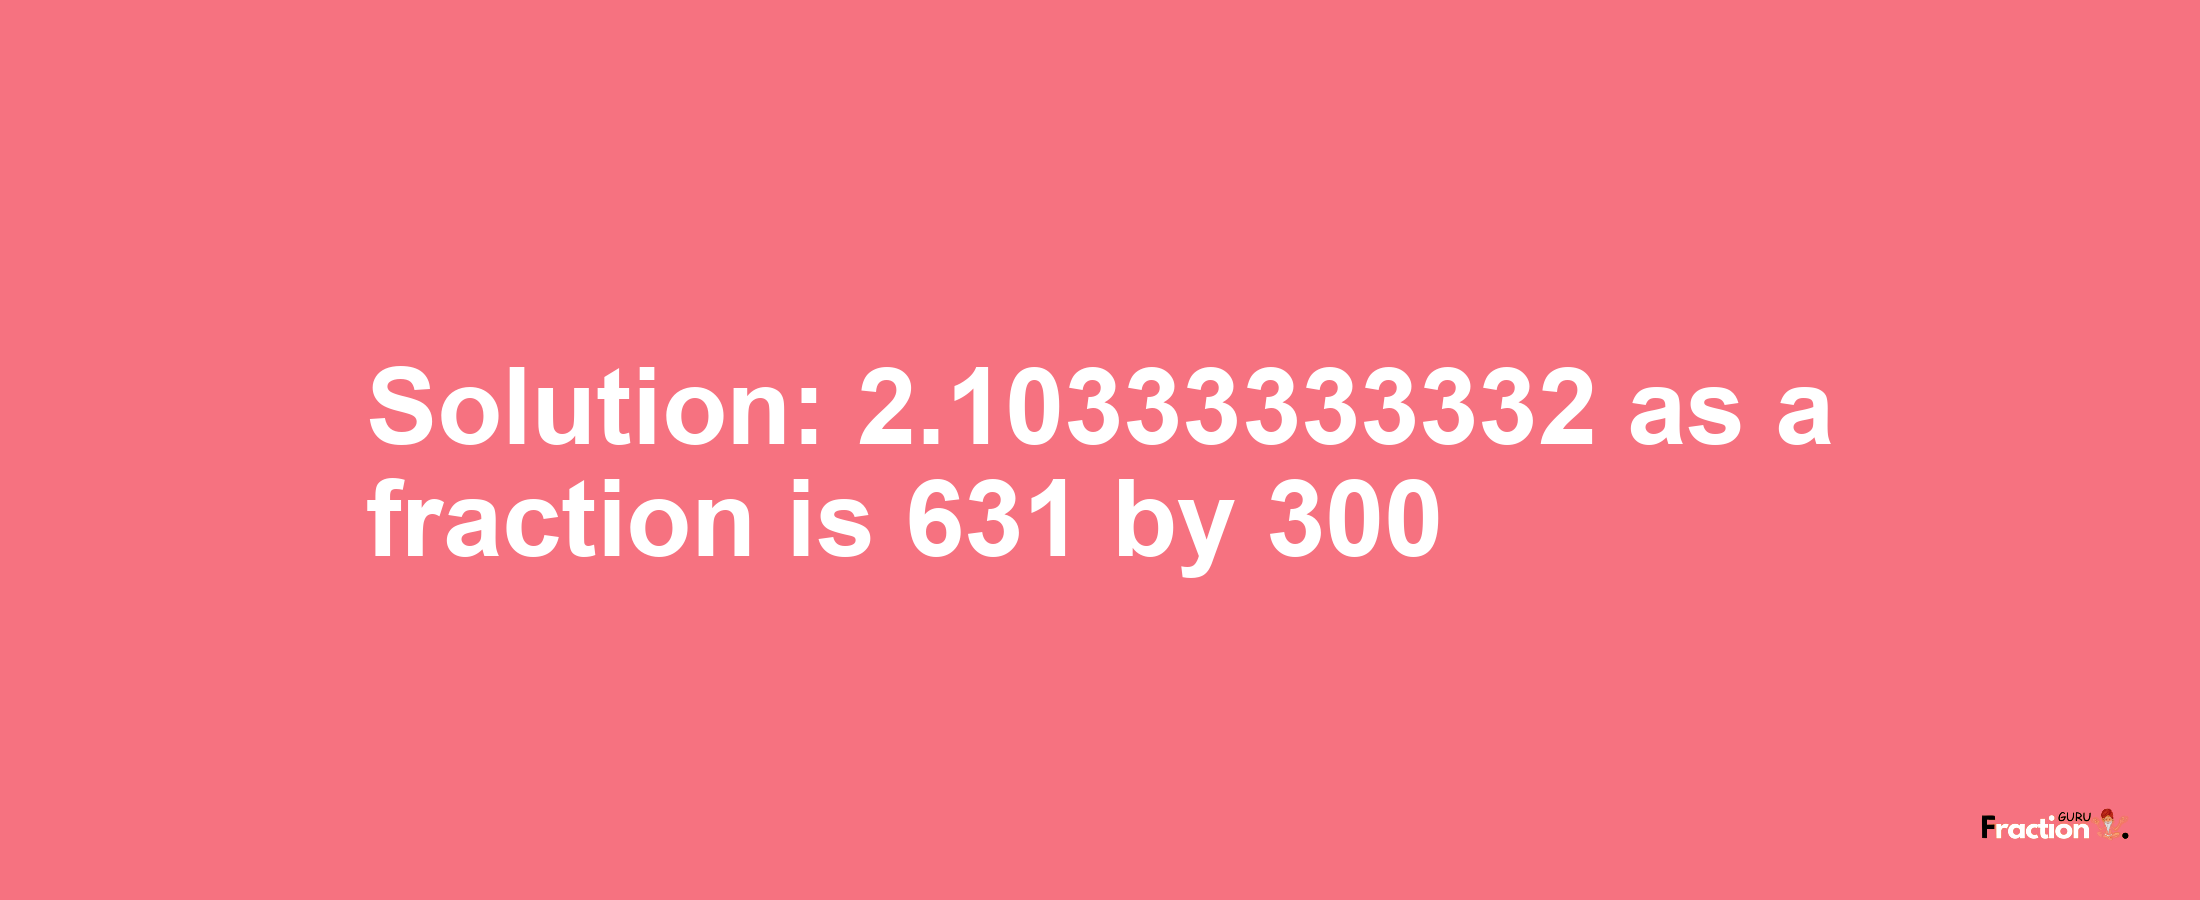 Solution:2.10333333332 as a fraction is 631/300